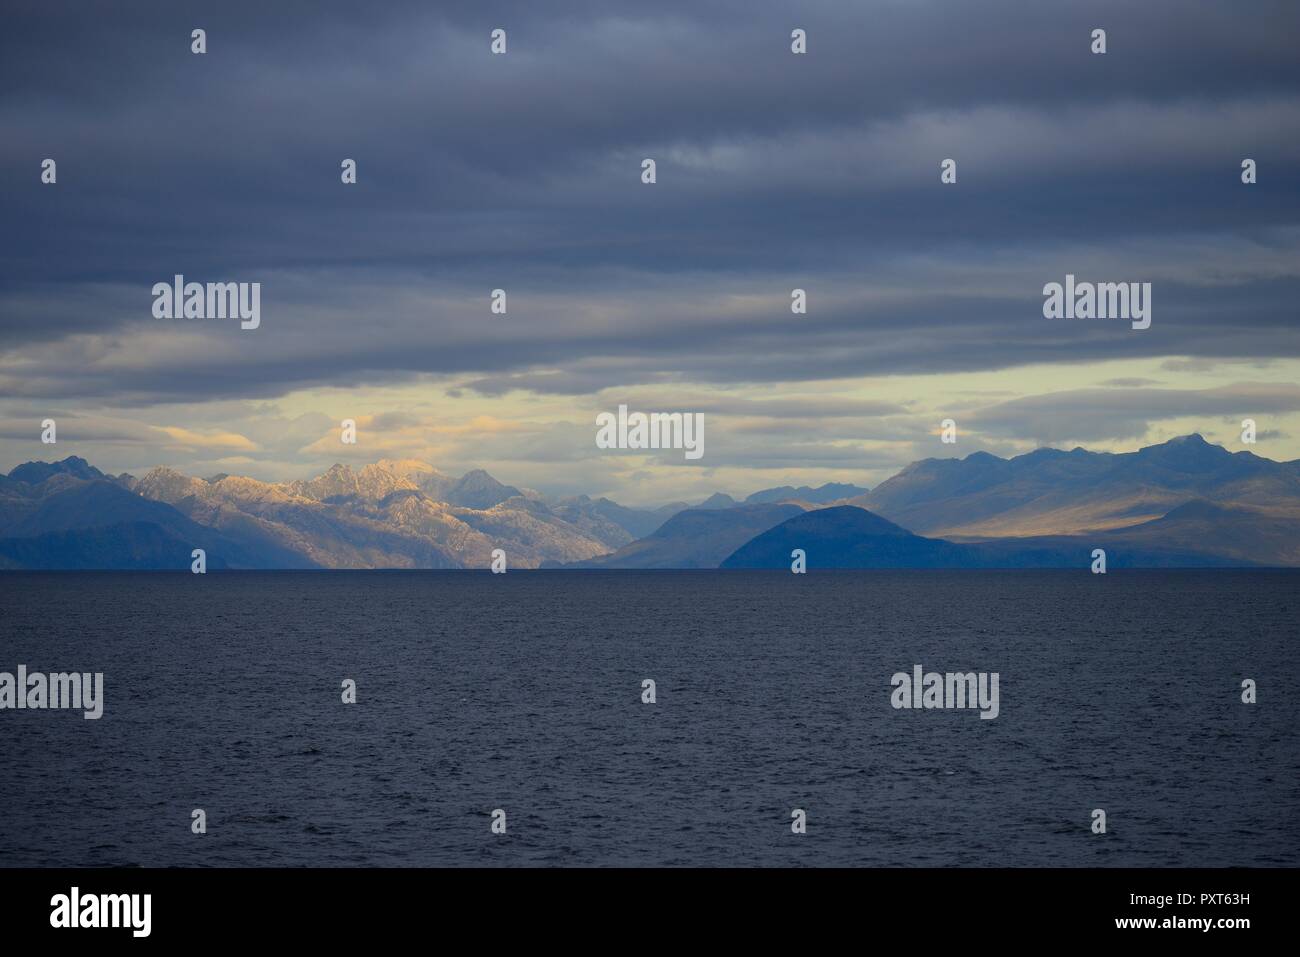 Coastal landscape with dark clouds, South Pacific, near Puerto Natales, Patagonia, Chile Stock Photo